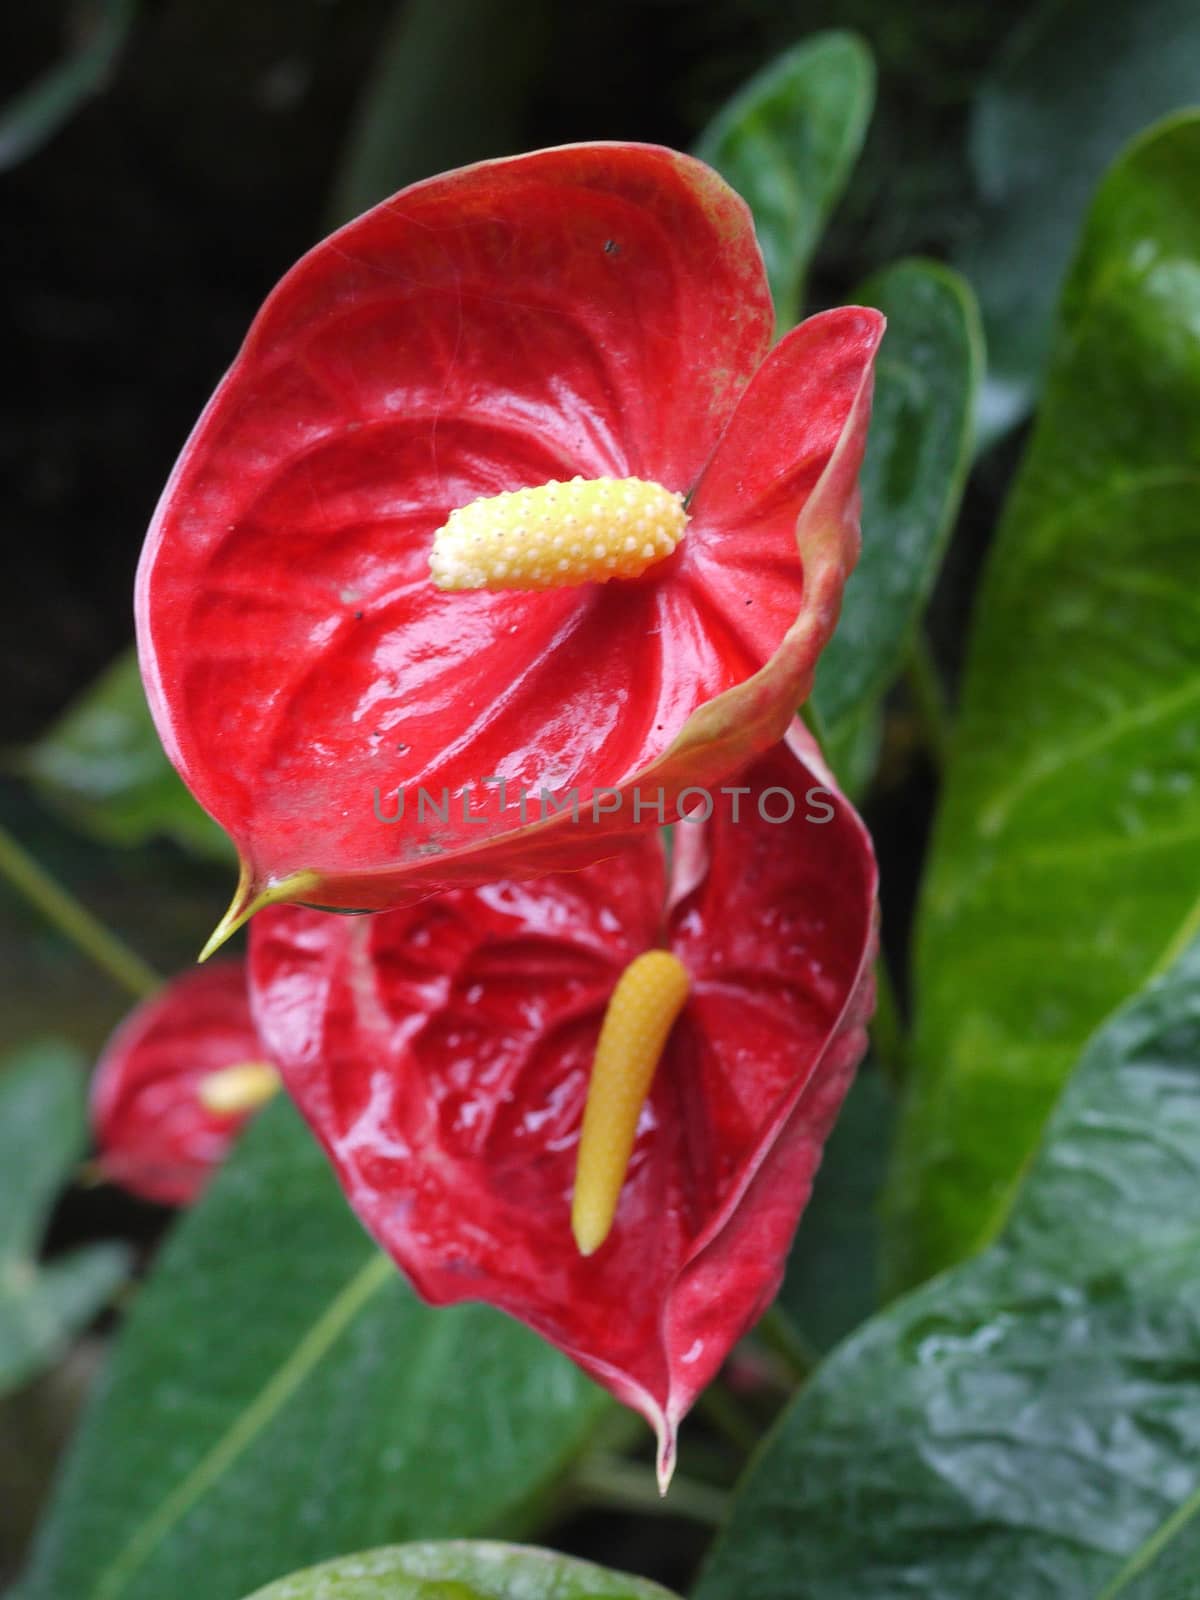 Very unusual interesting cup-shaped red flower petals. With a ye by Adamchuk